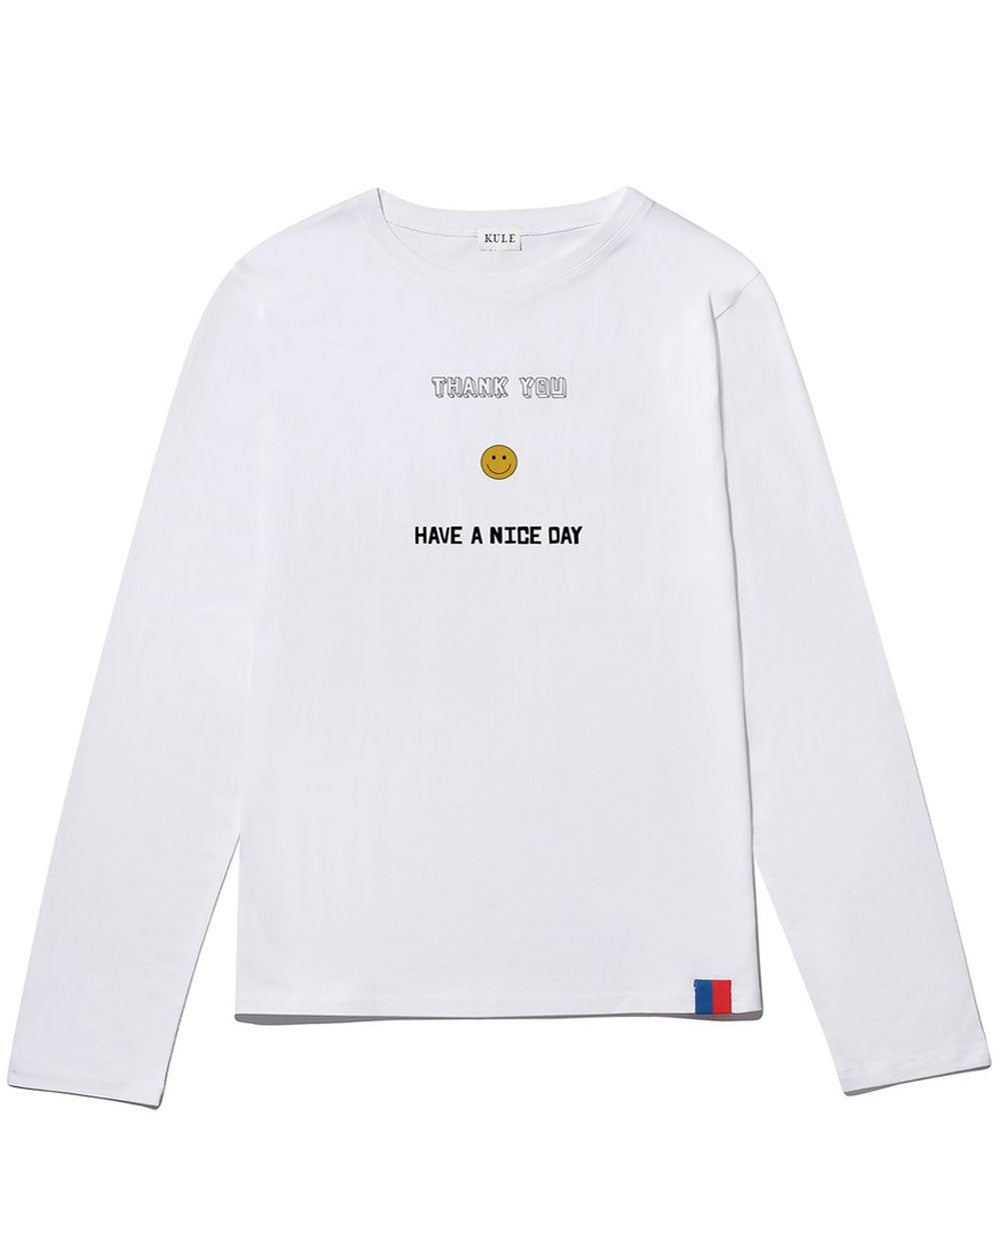 The Modern Long Sleeve Thank You Tee in White